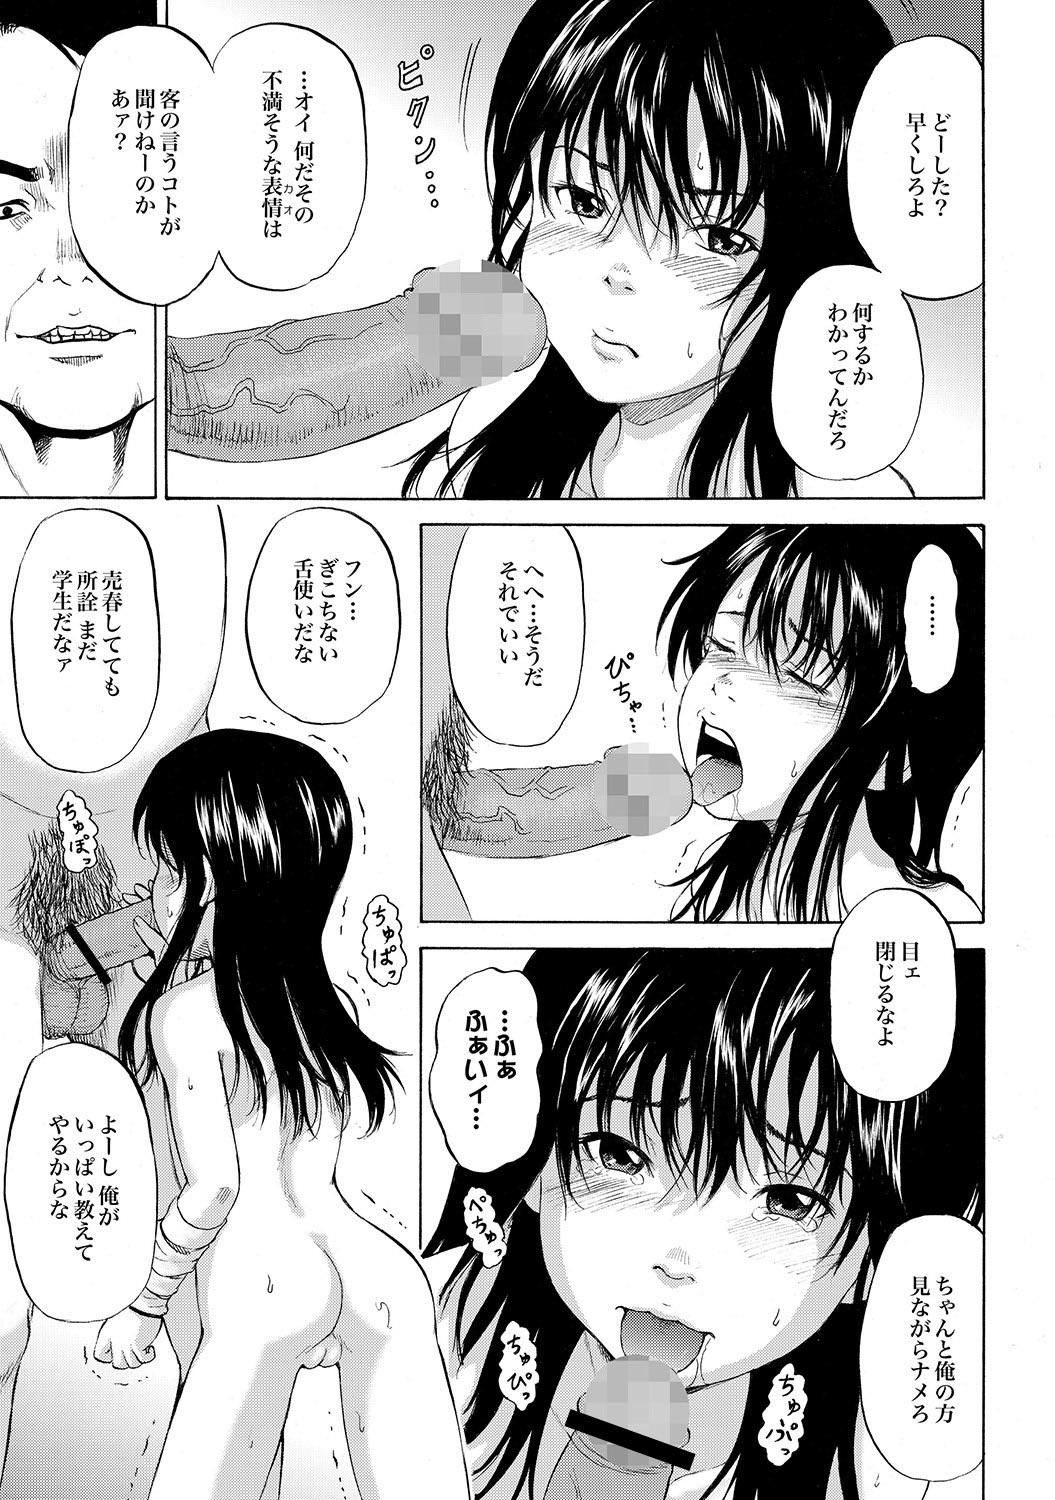 Orgasms 家出少女ユイカ第一話 ●い娼婦たち Muscles - Page 6